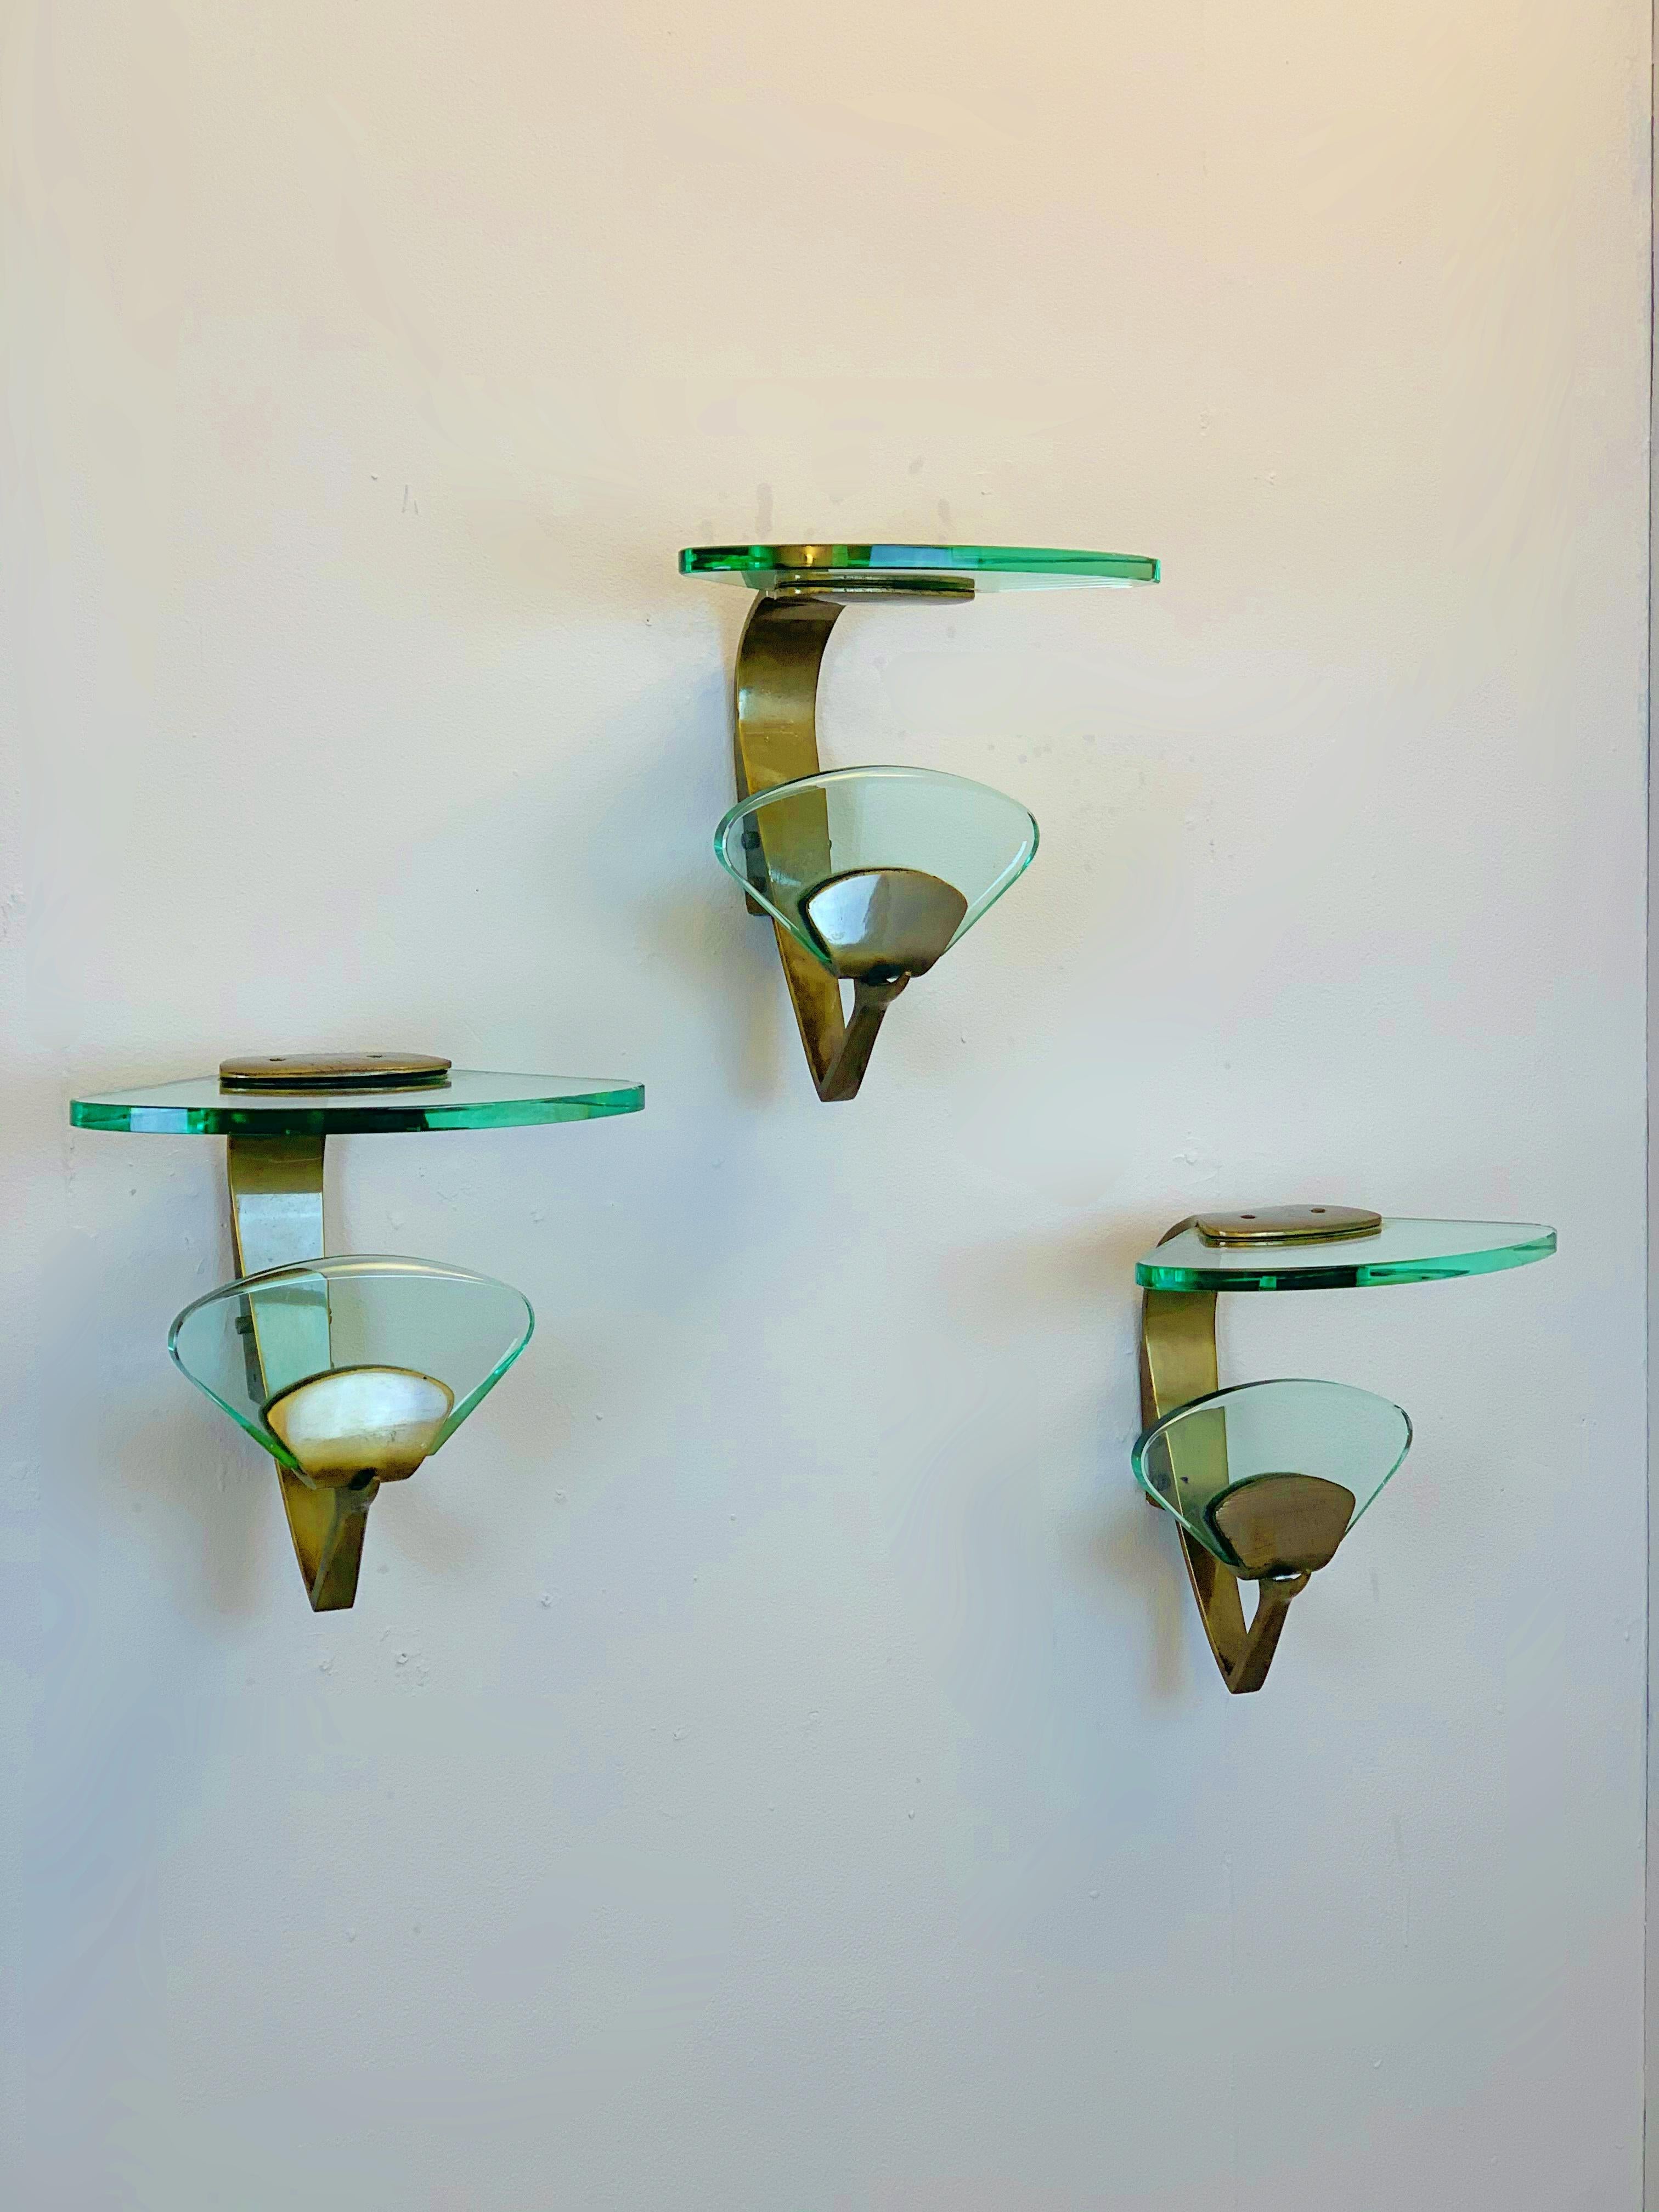 Mid-Century Modern Coat Hanger by Max Ingrand for Fontana Arte, 1960s, price for one For Sale